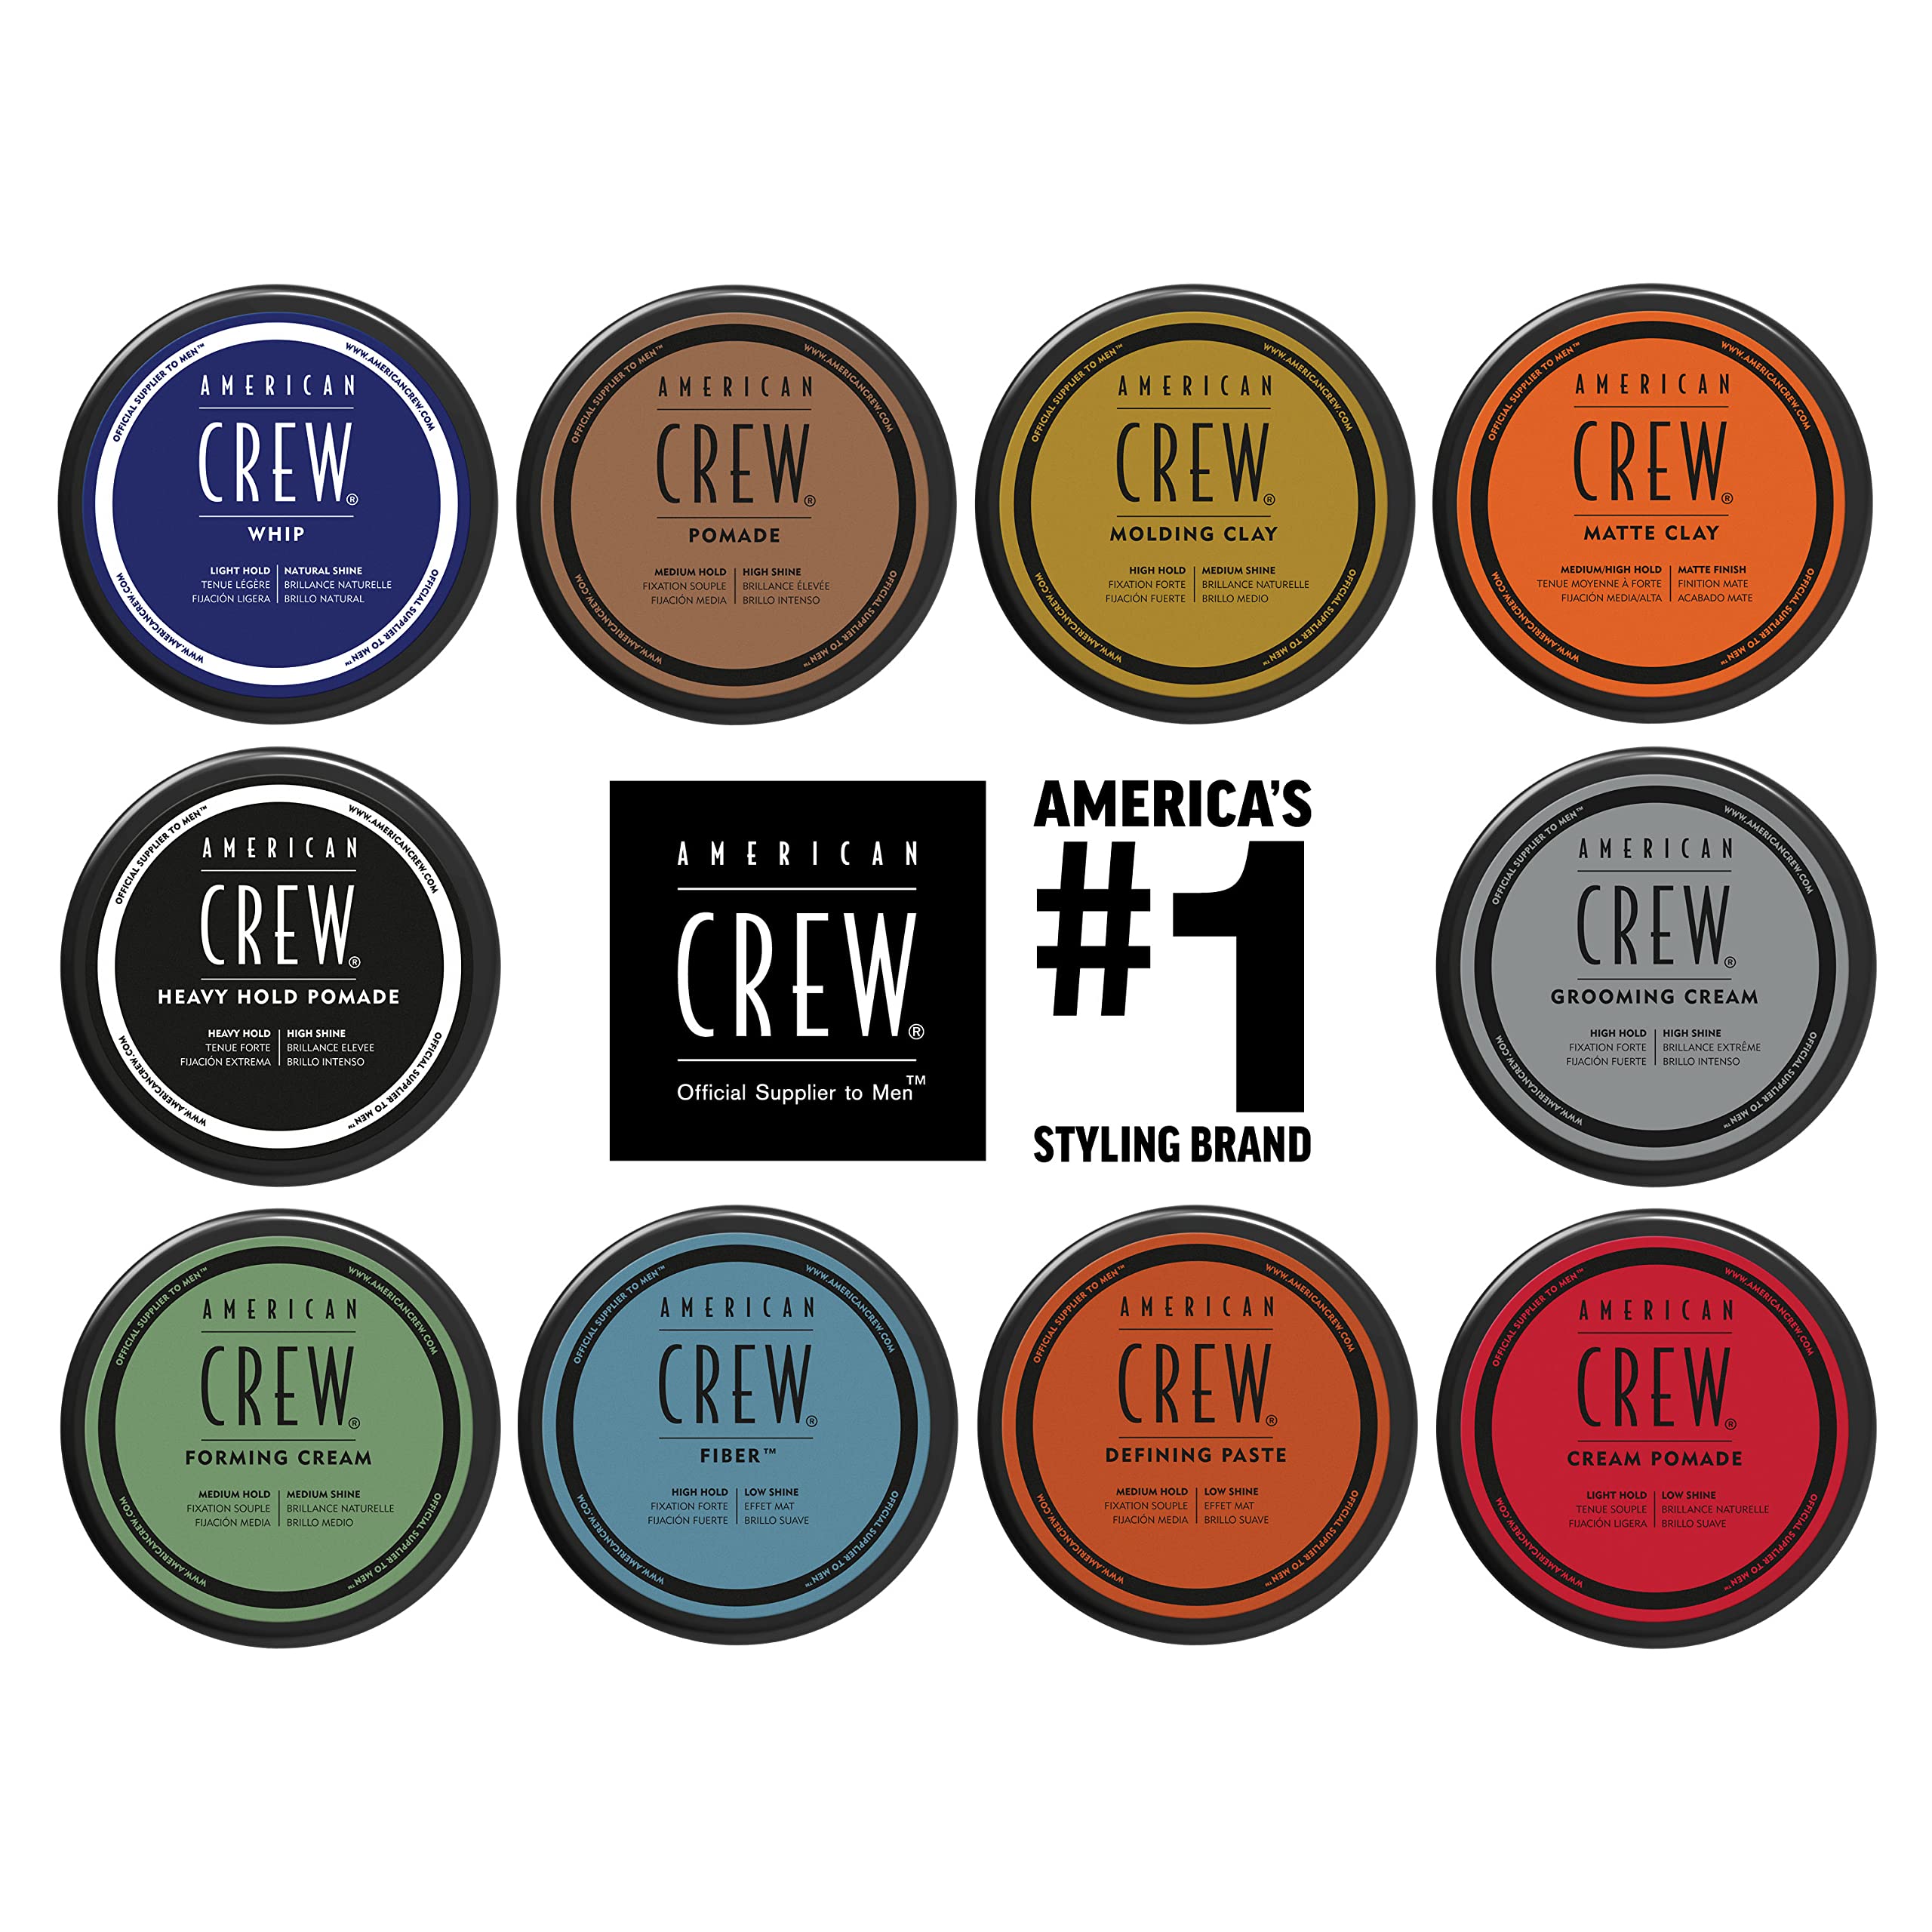 AMERICAN CREW Men's Grooming Cream, Like Hair Gel with High Hold & High Shine, 3 Oz (Pack of 1)